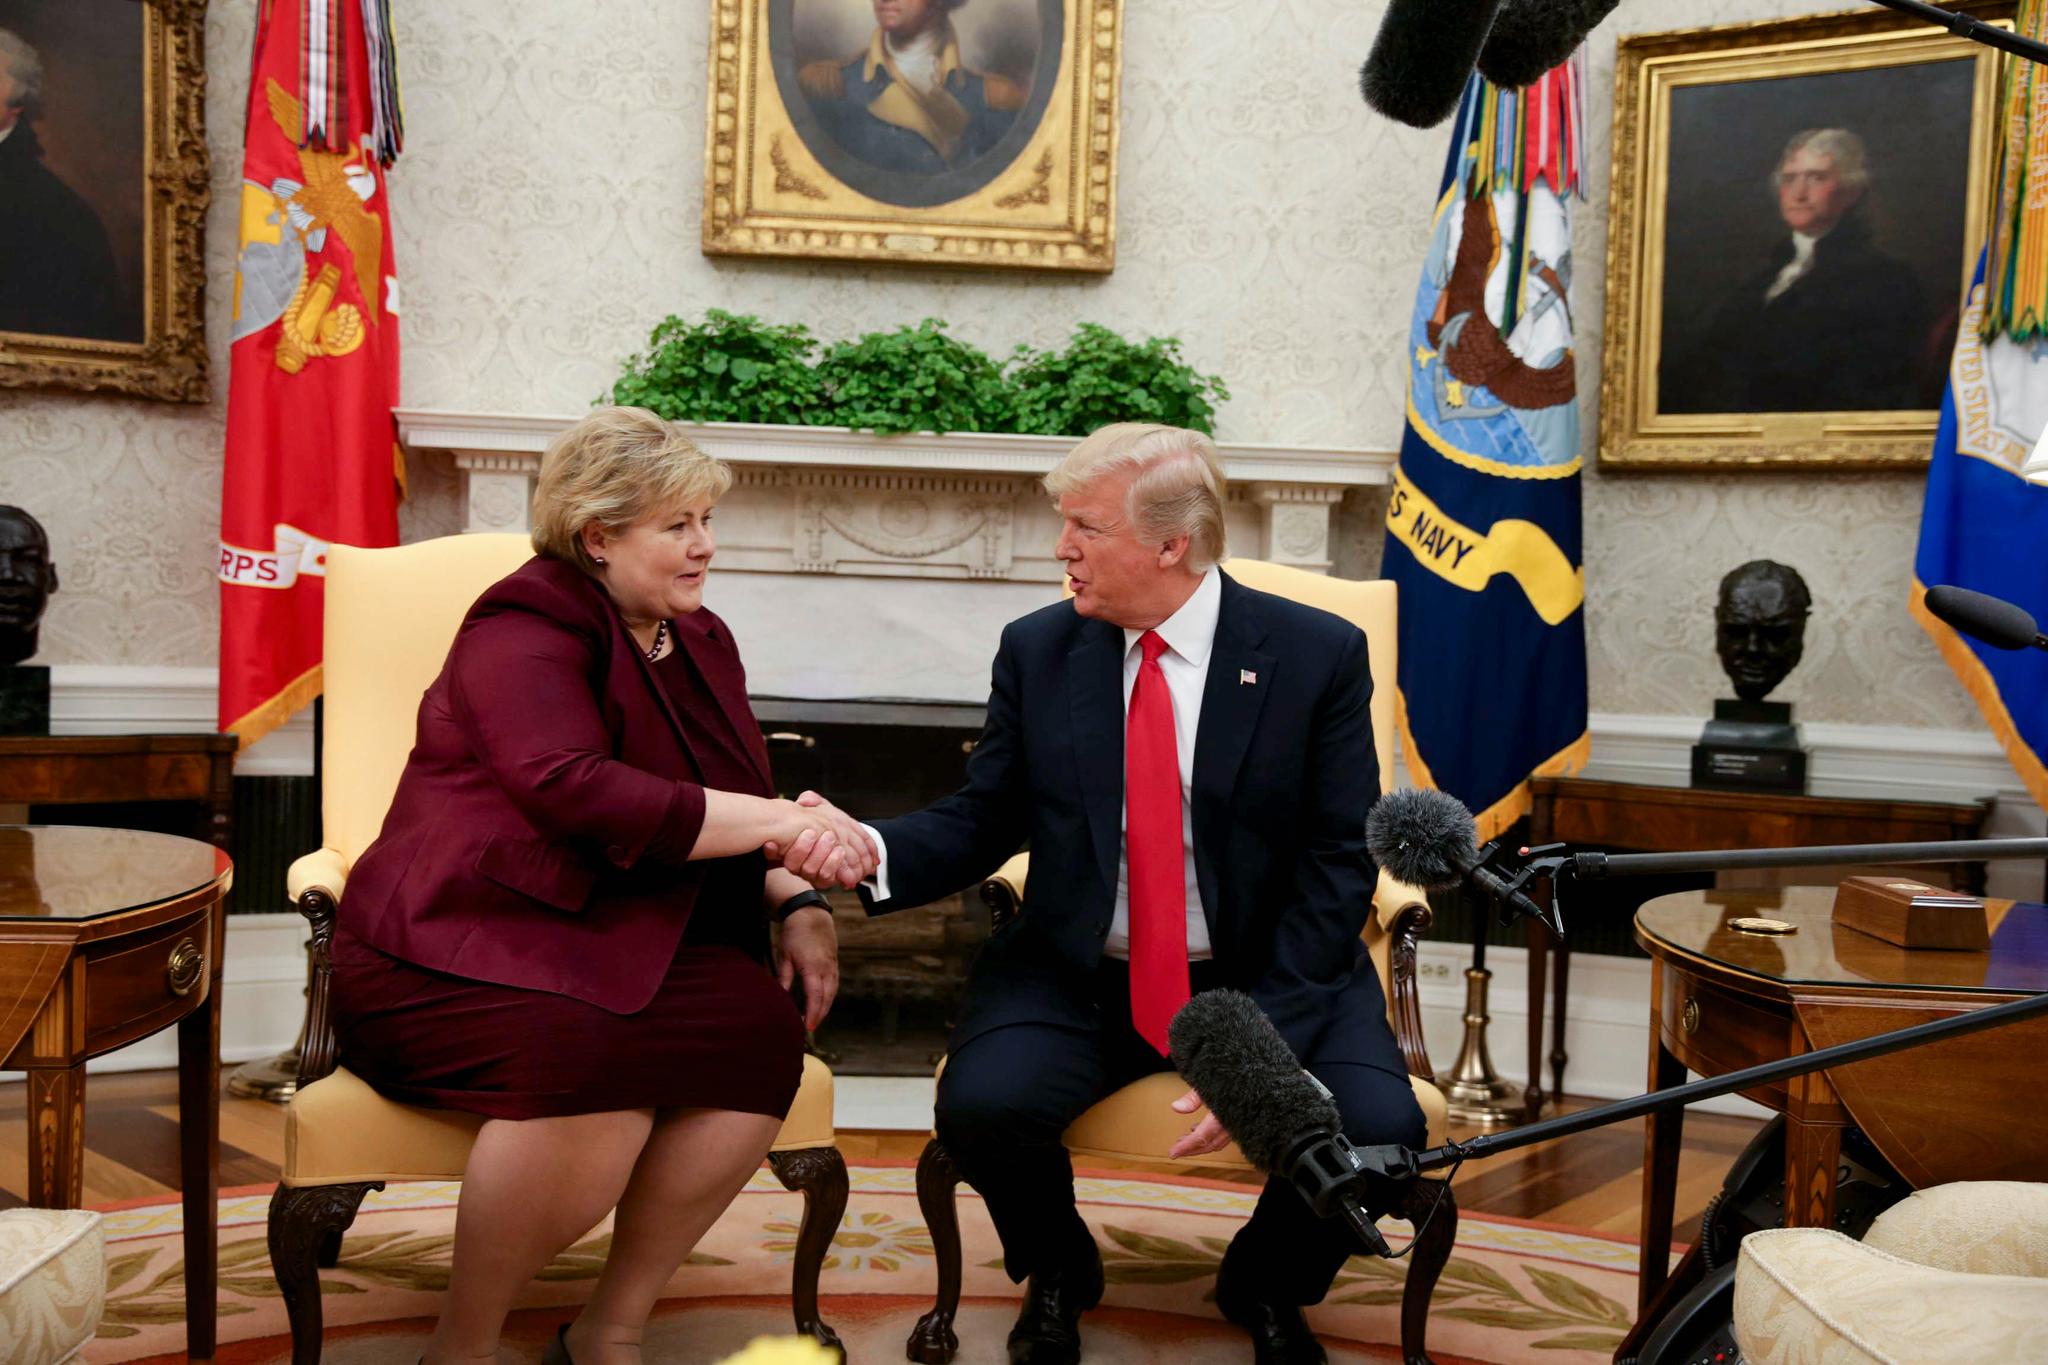 As Norway’s first prime minister, Solberg was invited to a G7 summit